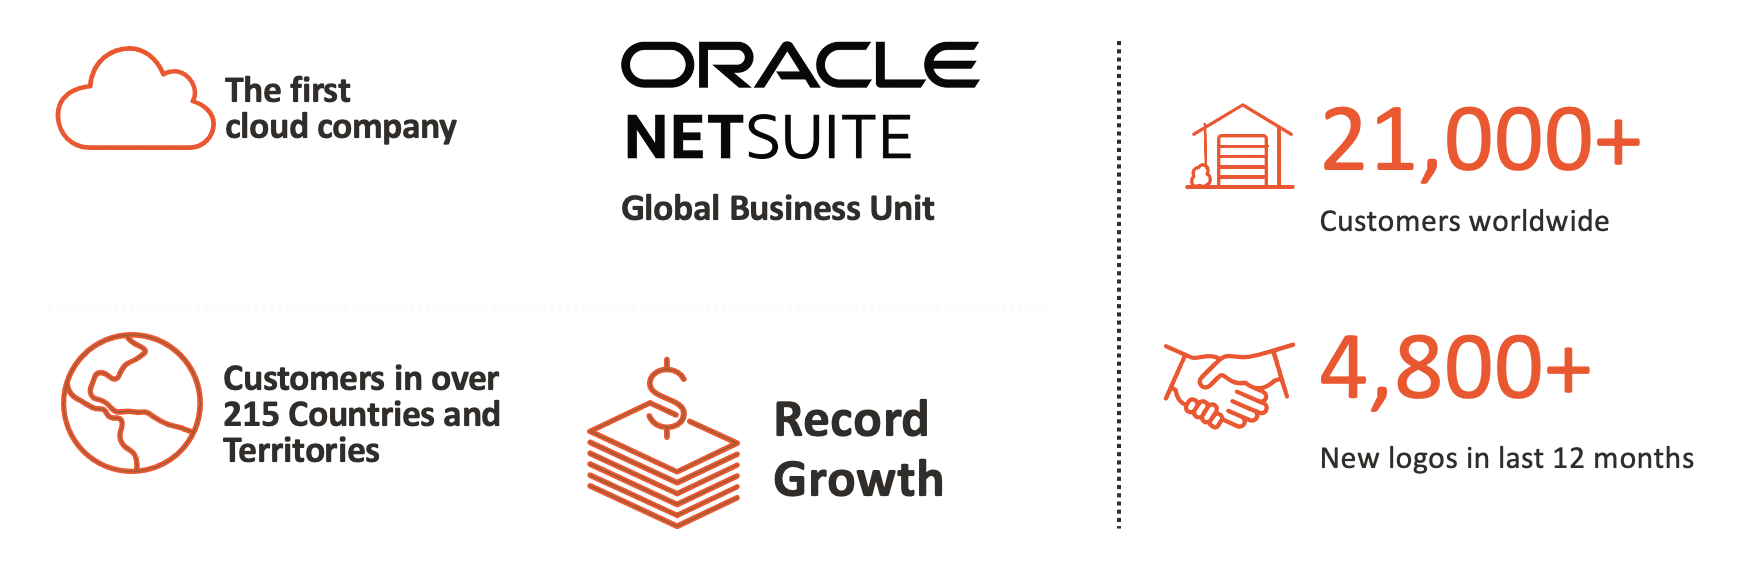 NetSuite Facts and Figures